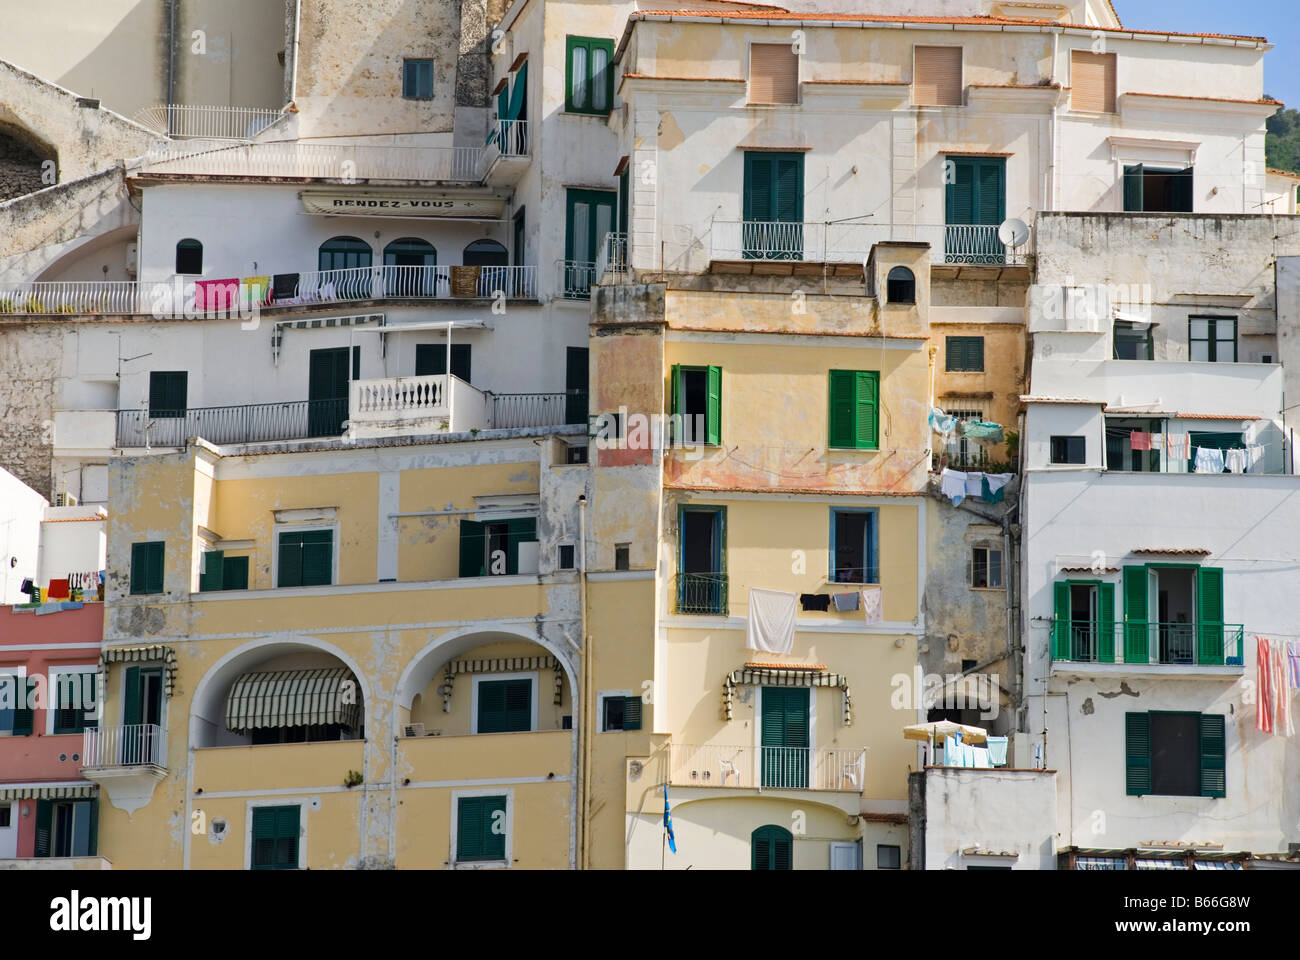 Buildings tower one on top of another, clinging to the steep cliffs that overlook the coast in Amalfi Town, Campania, Italy Stock Photo